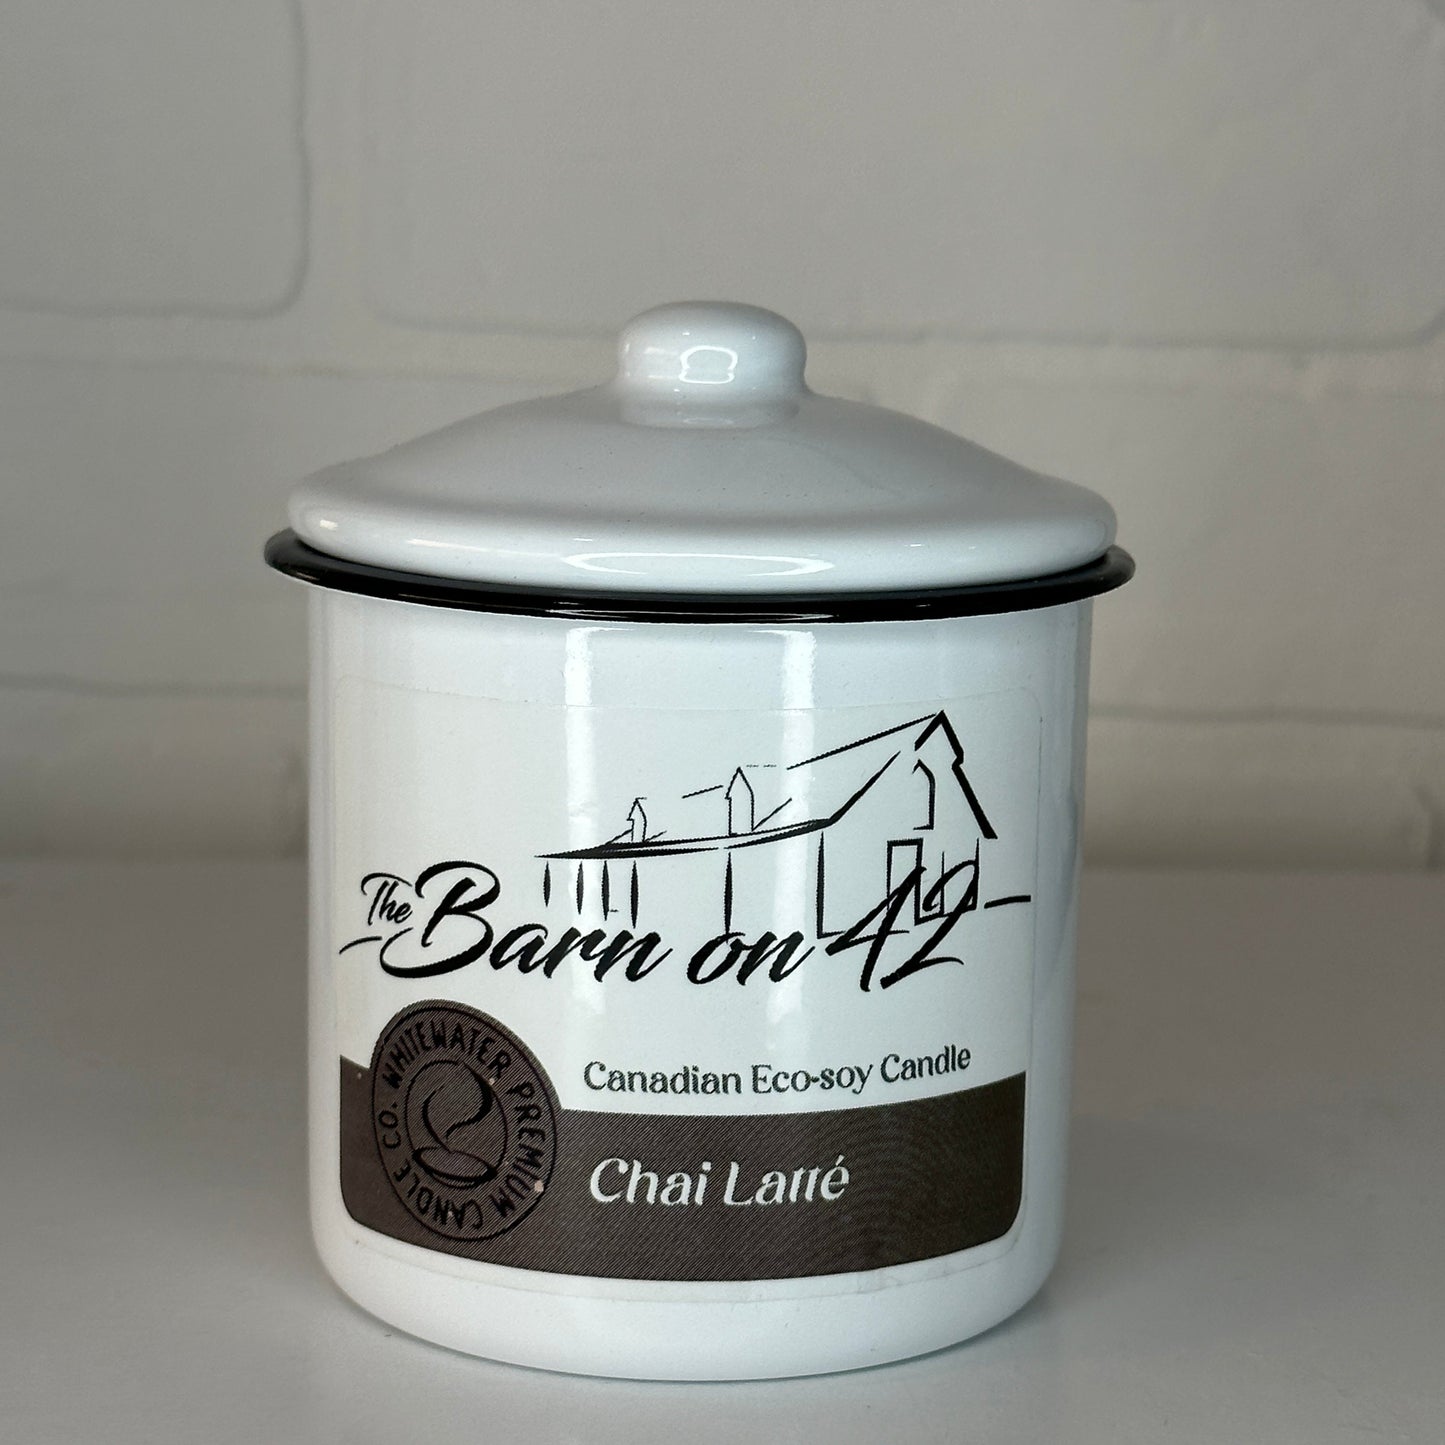 Chai Latte 9 oz Eco-Soy Candle Whitewater Candles